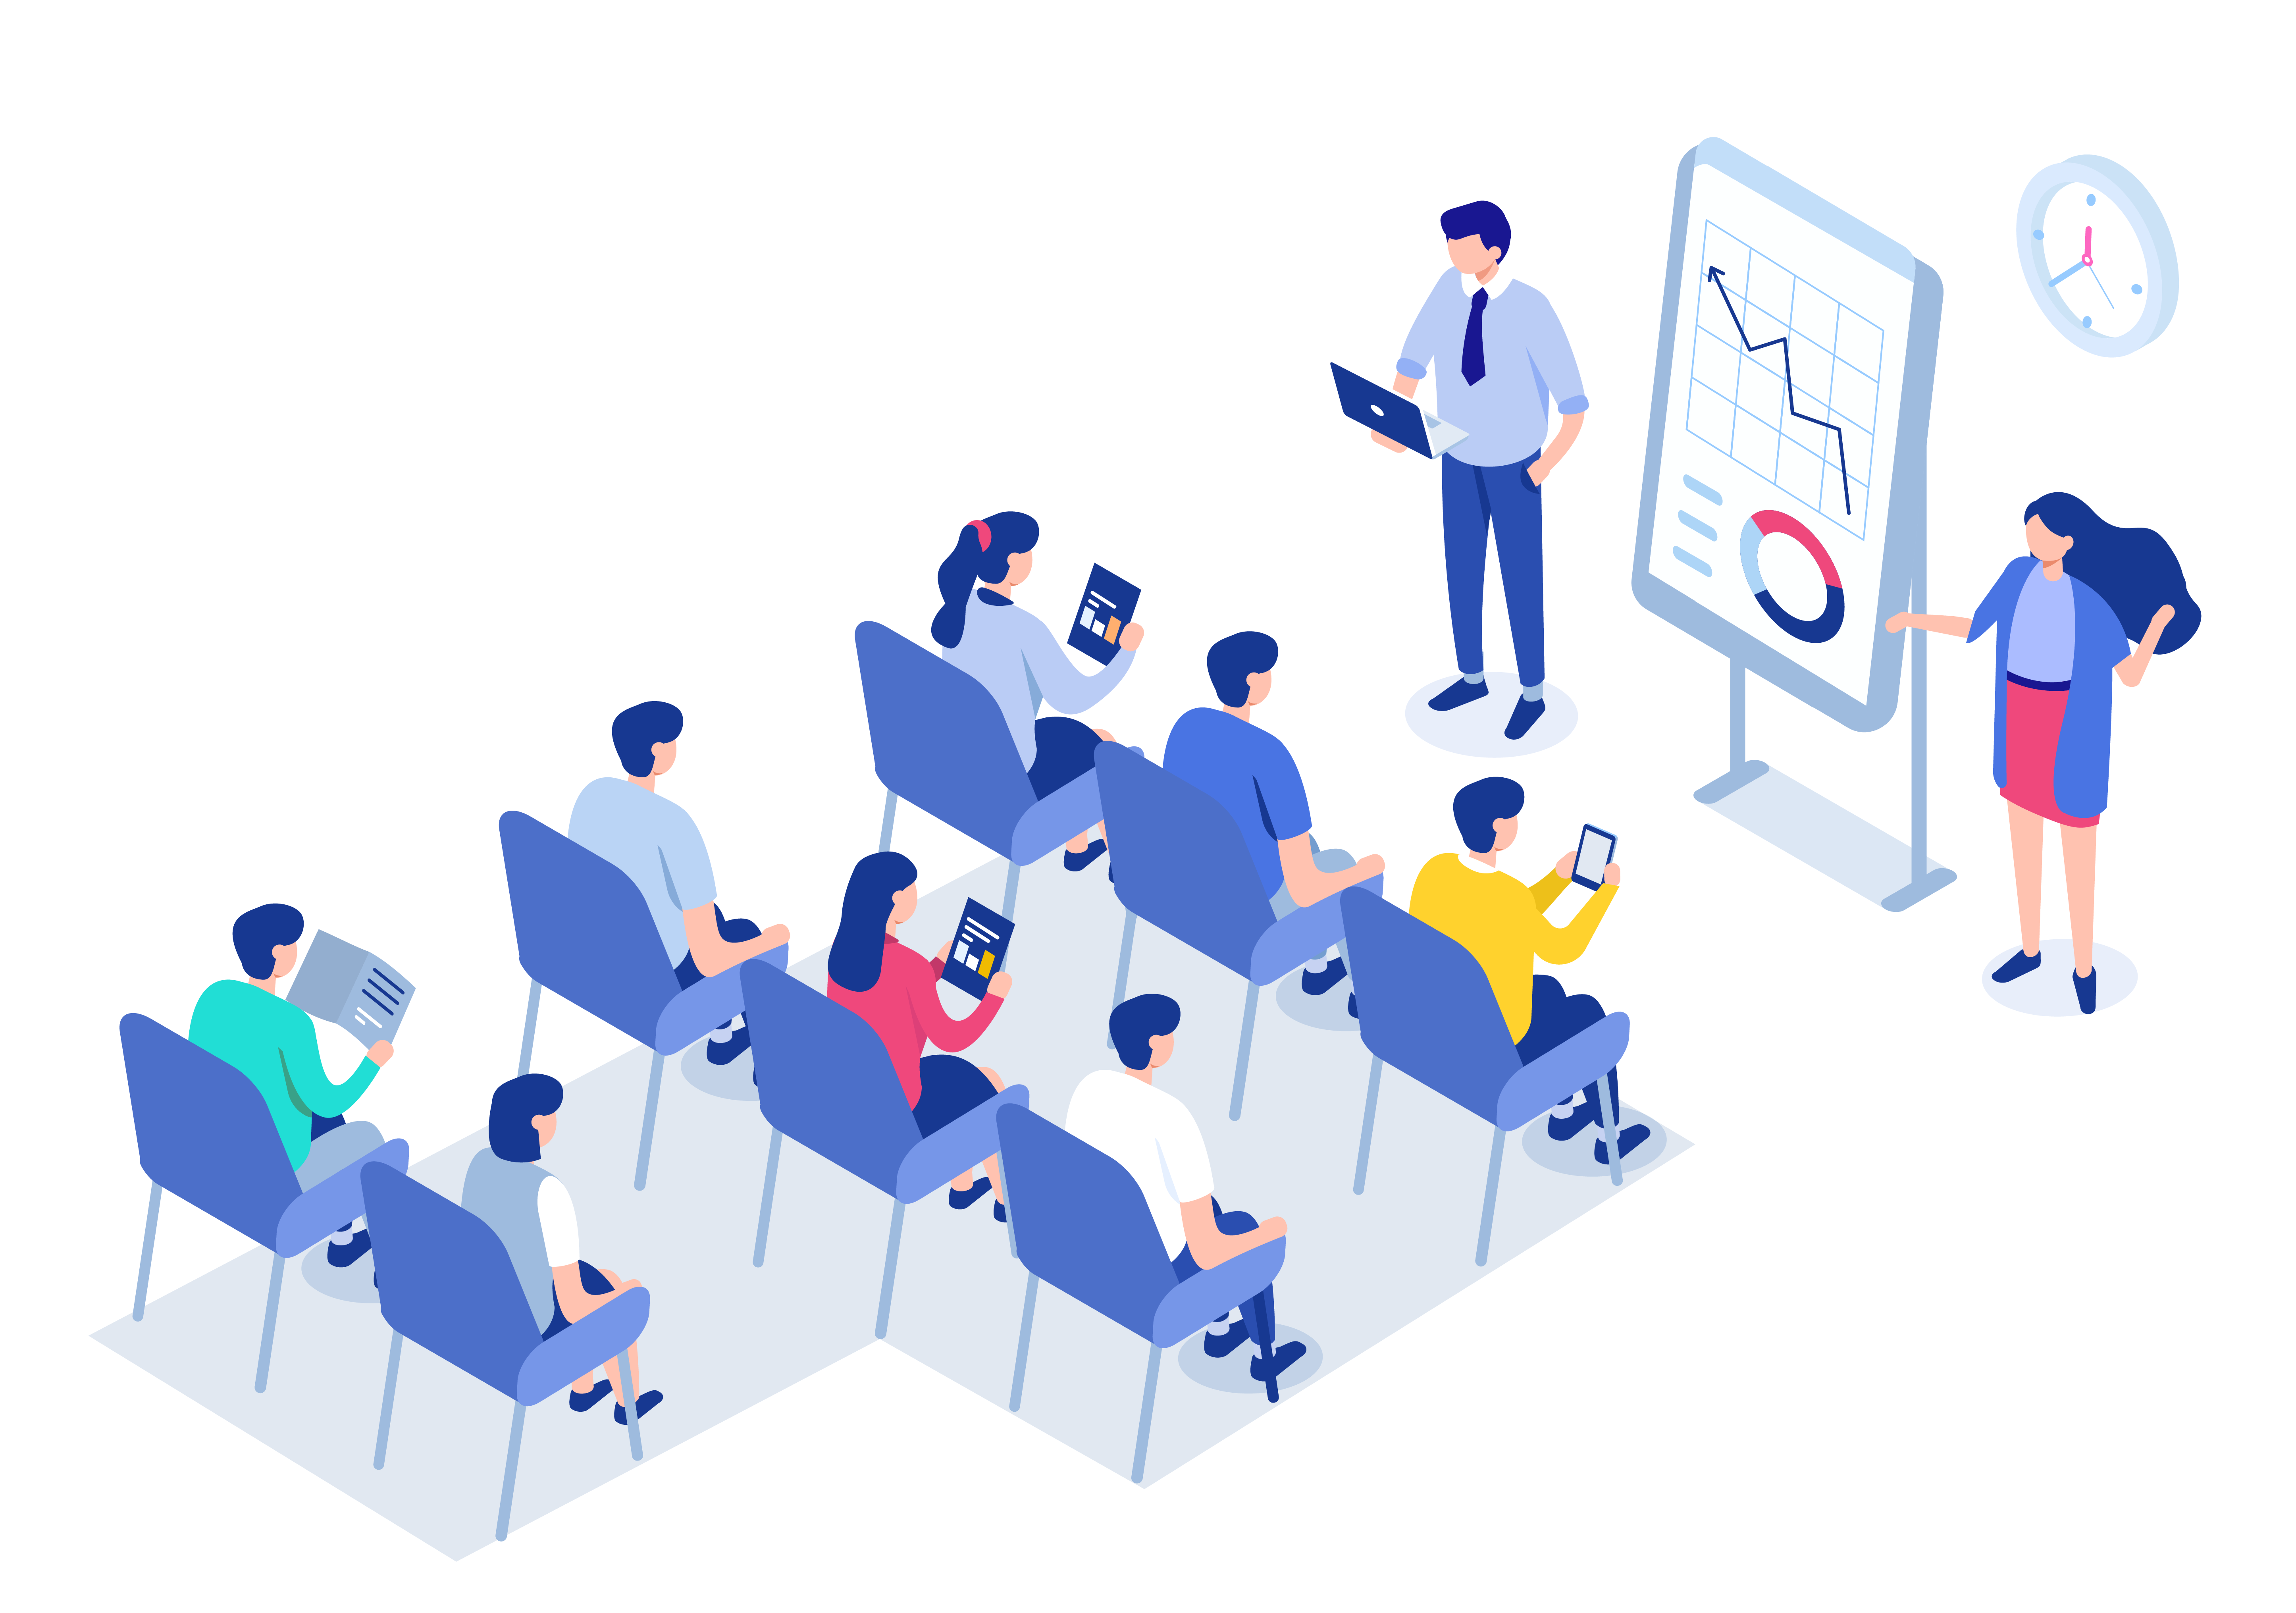 isometric illustration of people attending a business sales training